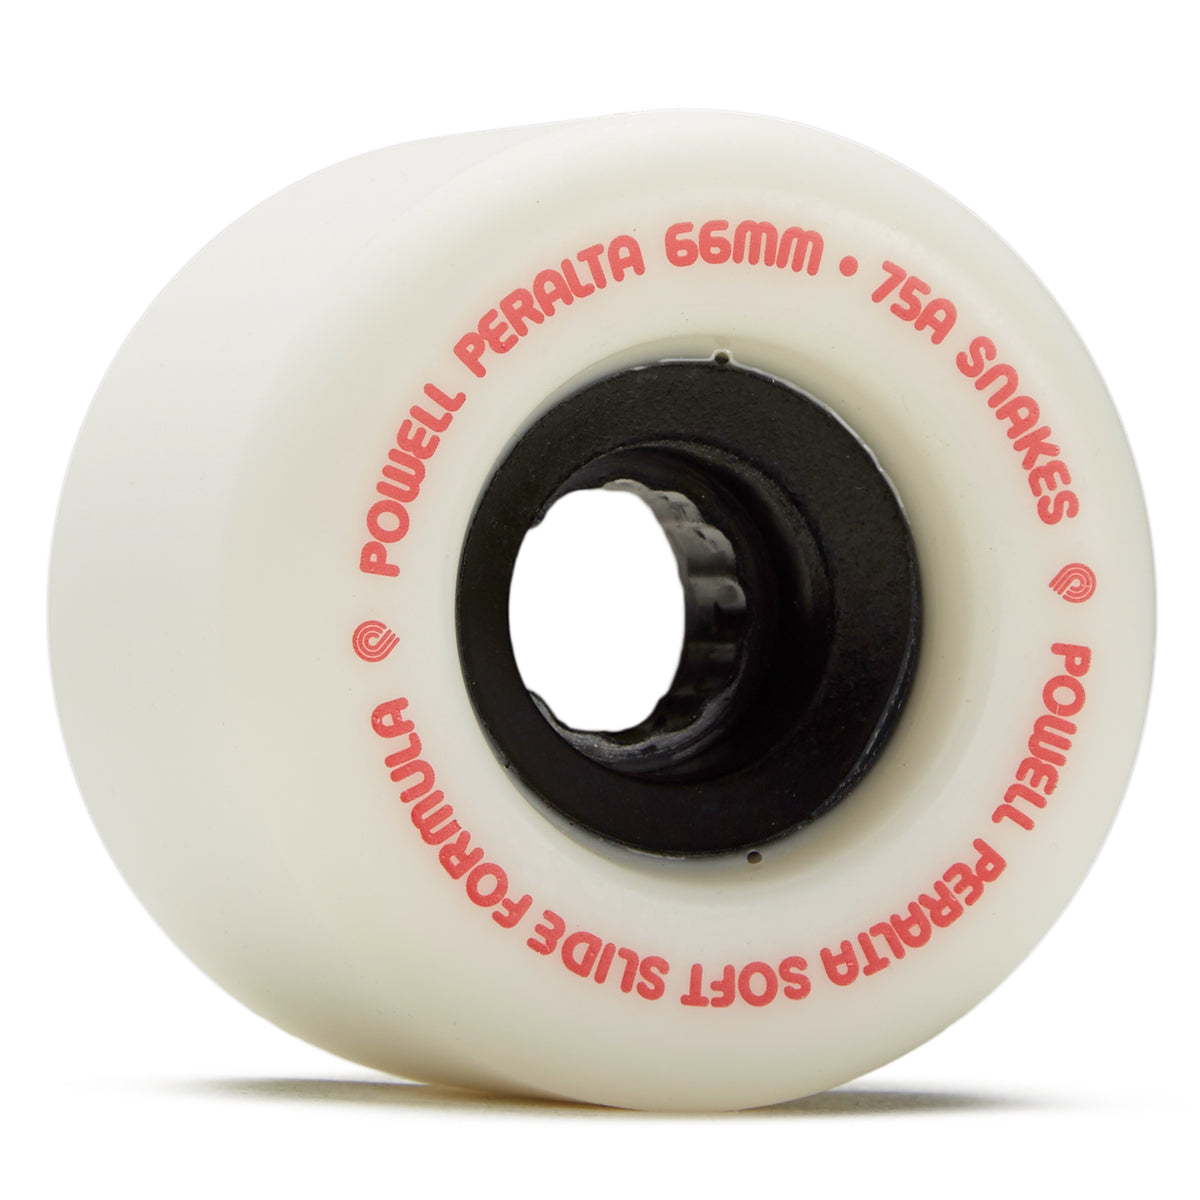 Powell-Peralta Snakes 75A Longboard Wheels - White - 66mm image 1